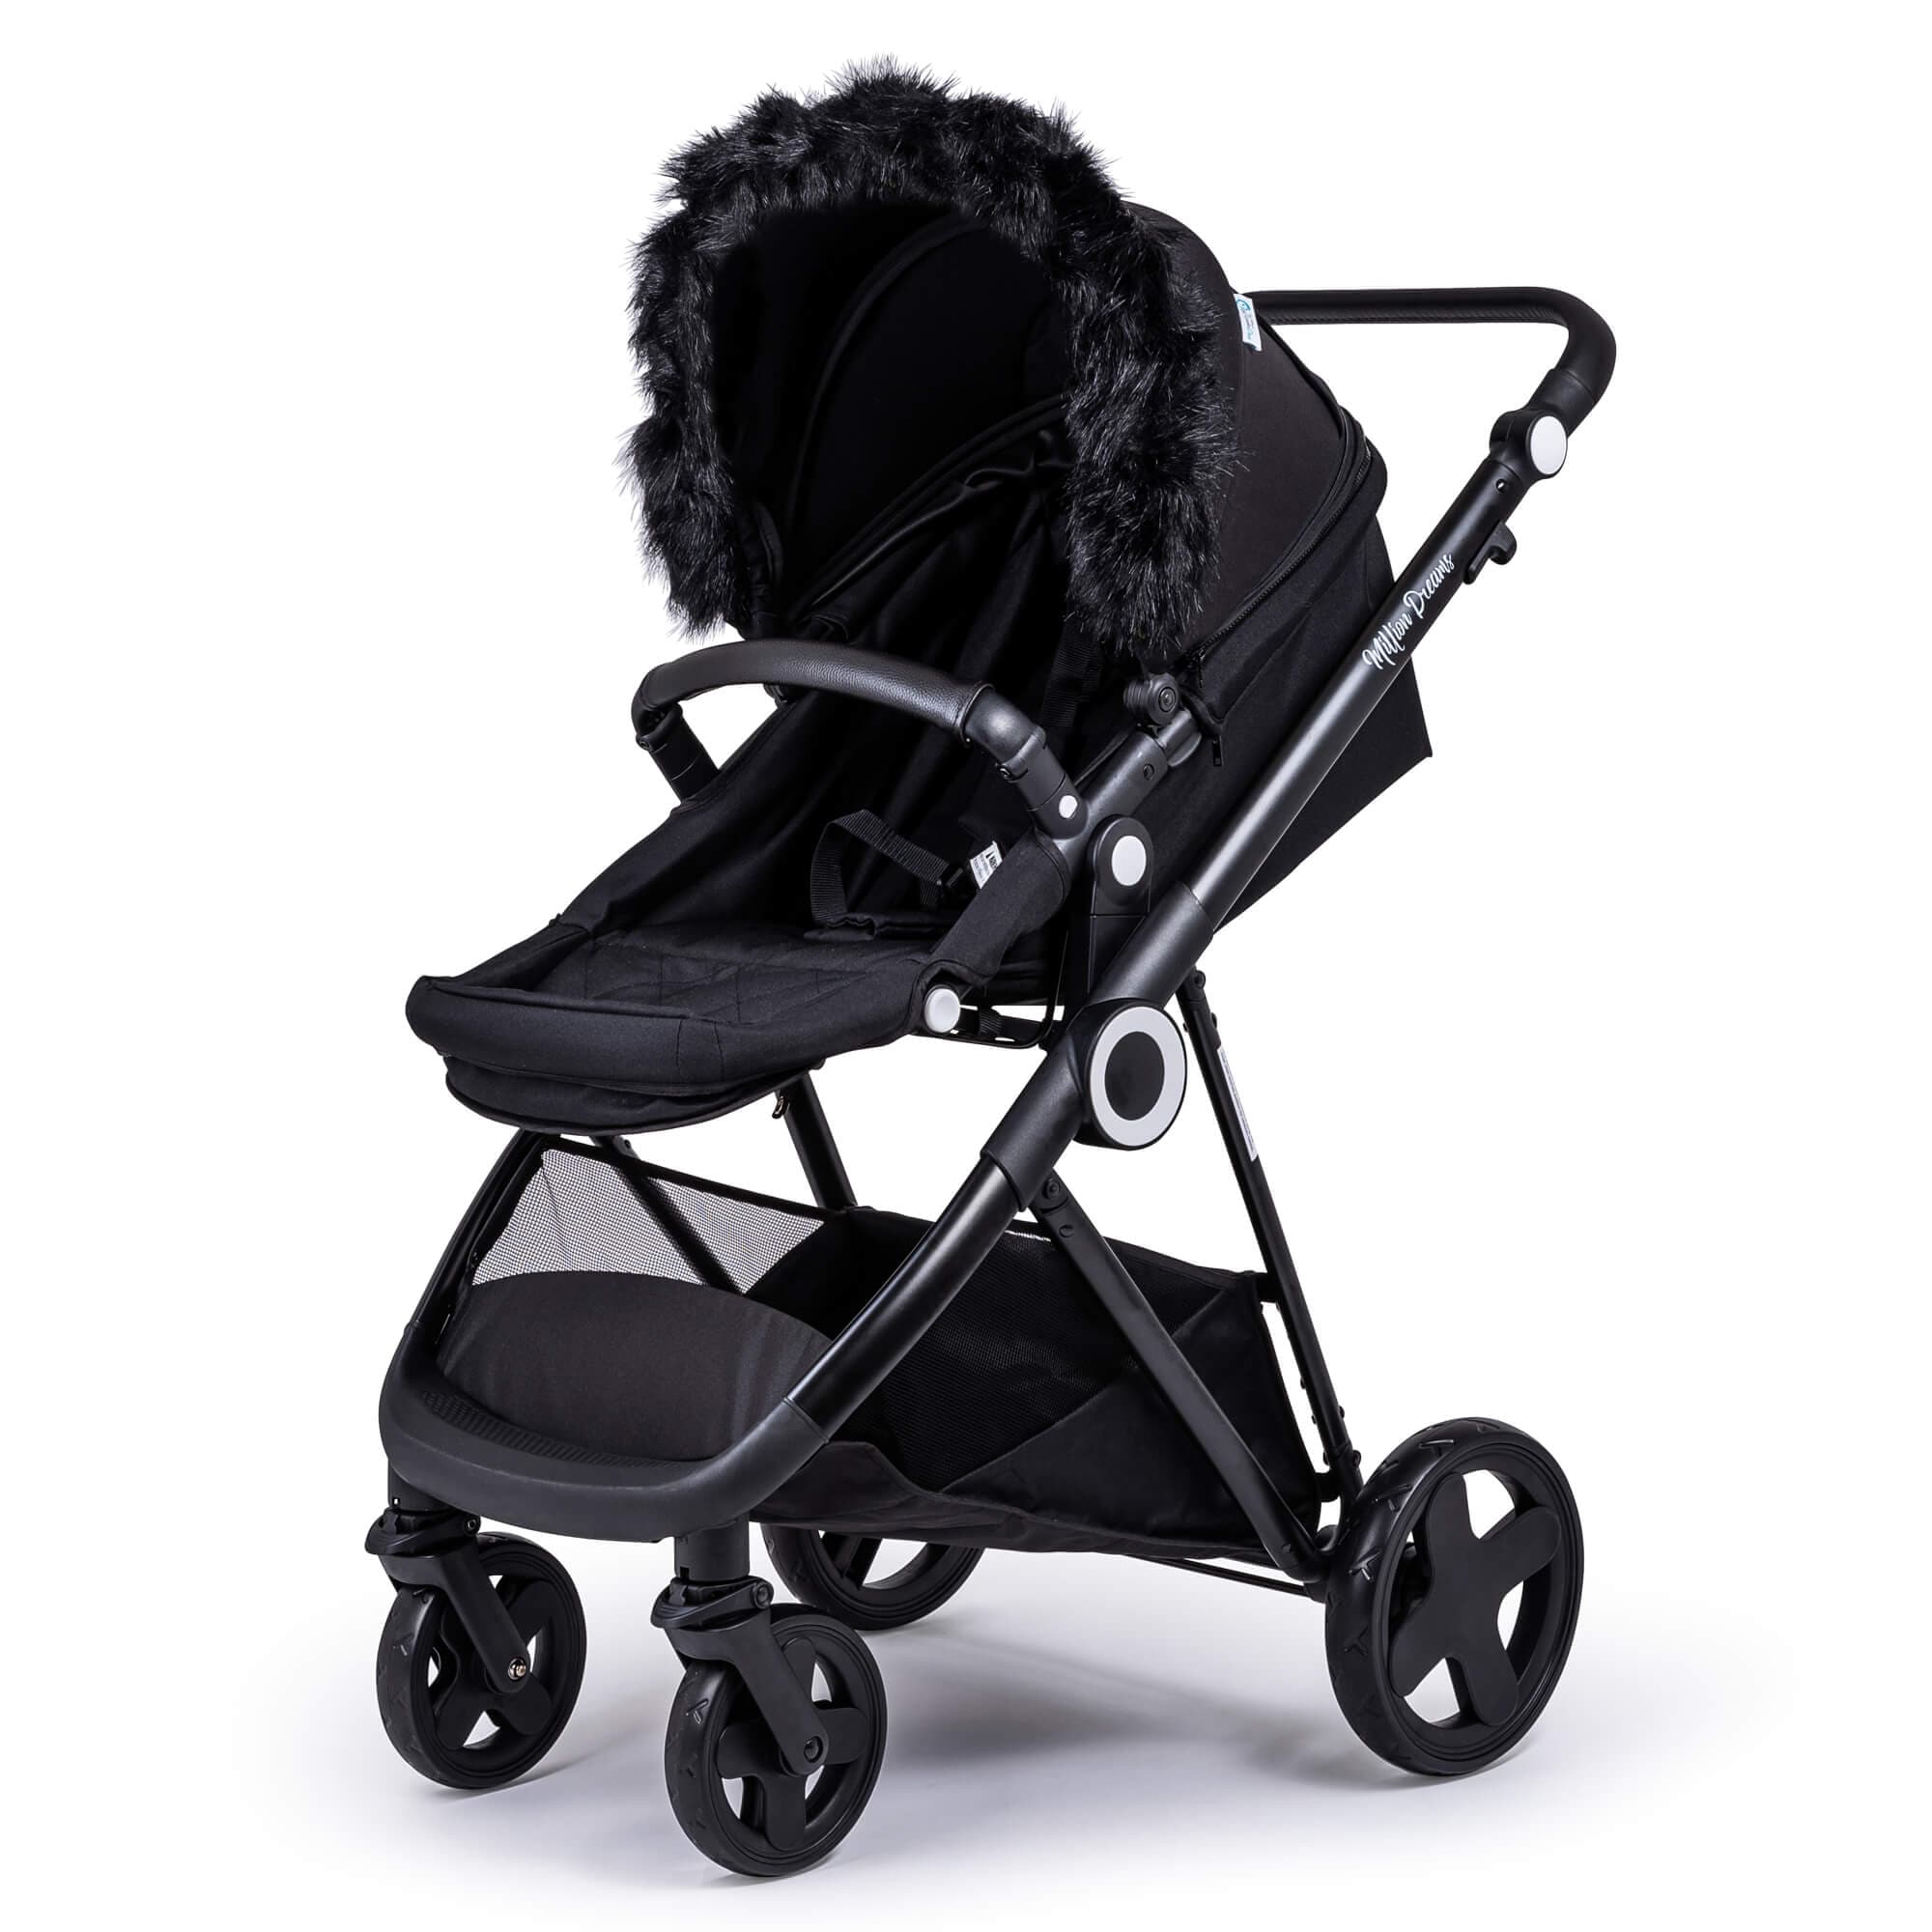 Pram Fur Hood Trim Attachment for Pushchair Compatible with Baby Elegance - For Your Little One